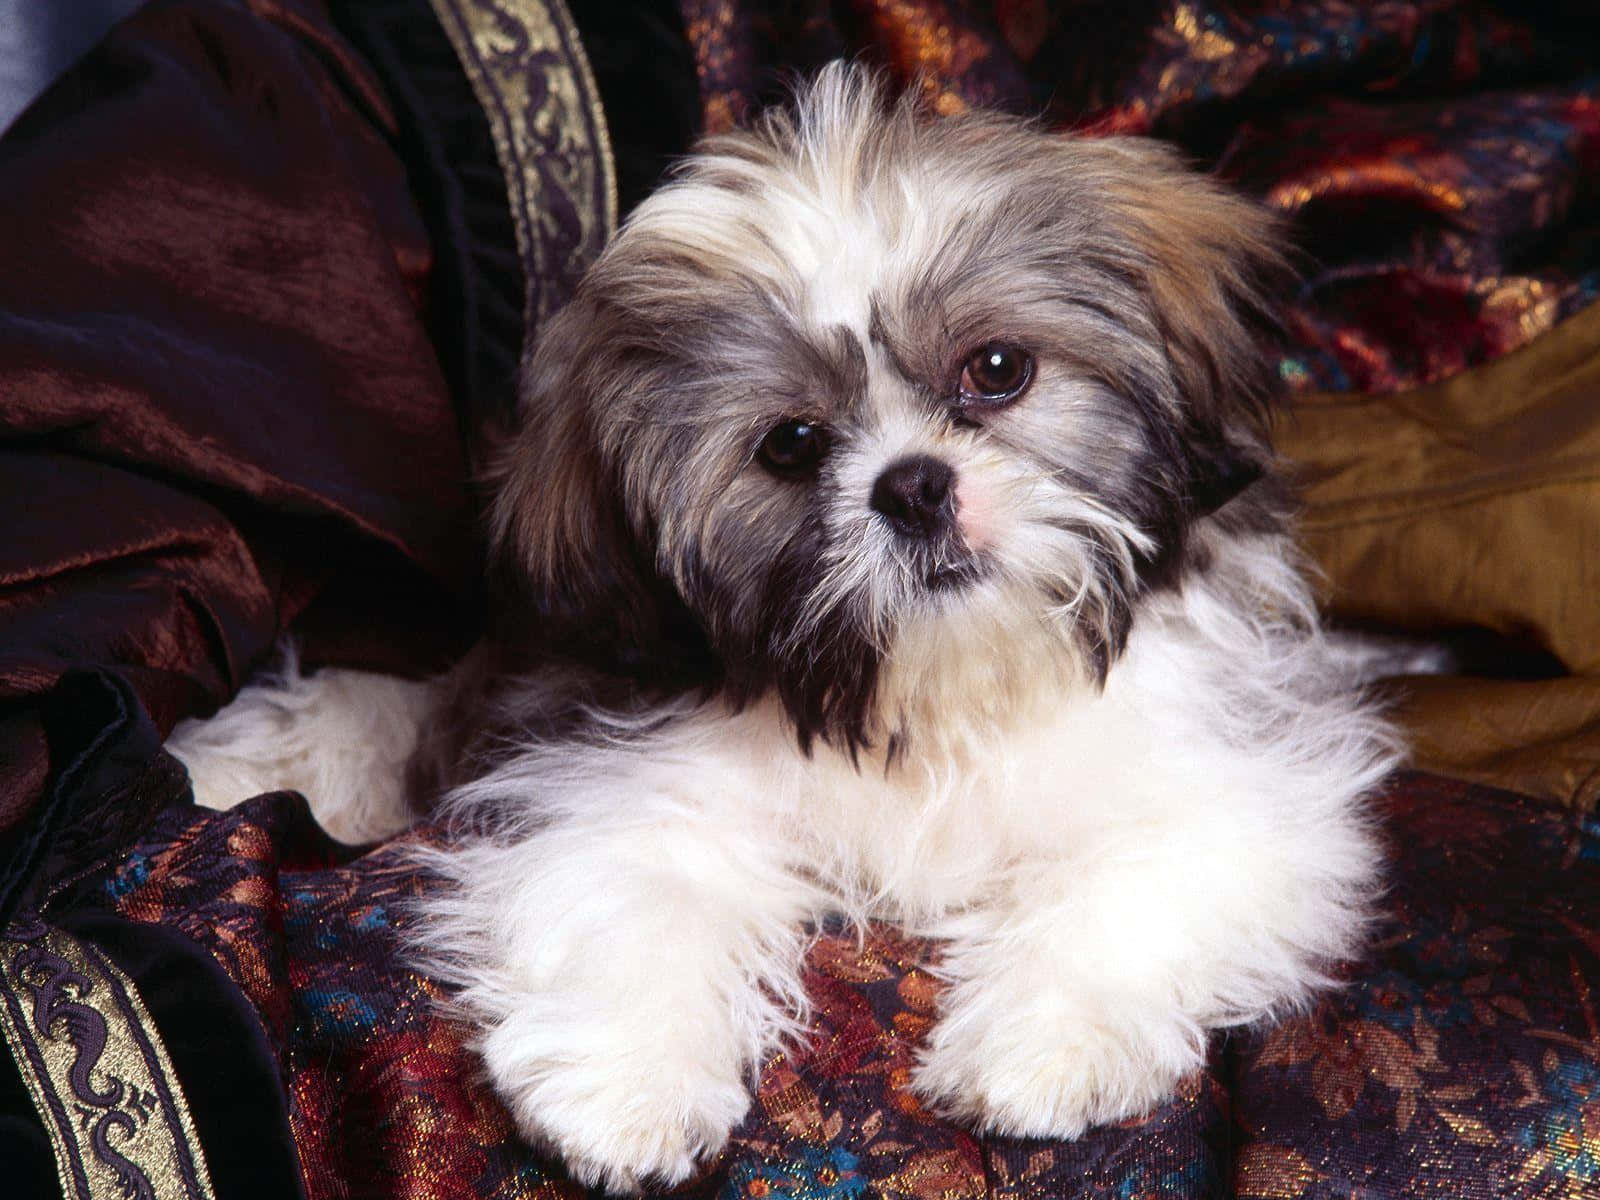 Adorable Shih Tzu Posing for a Picture